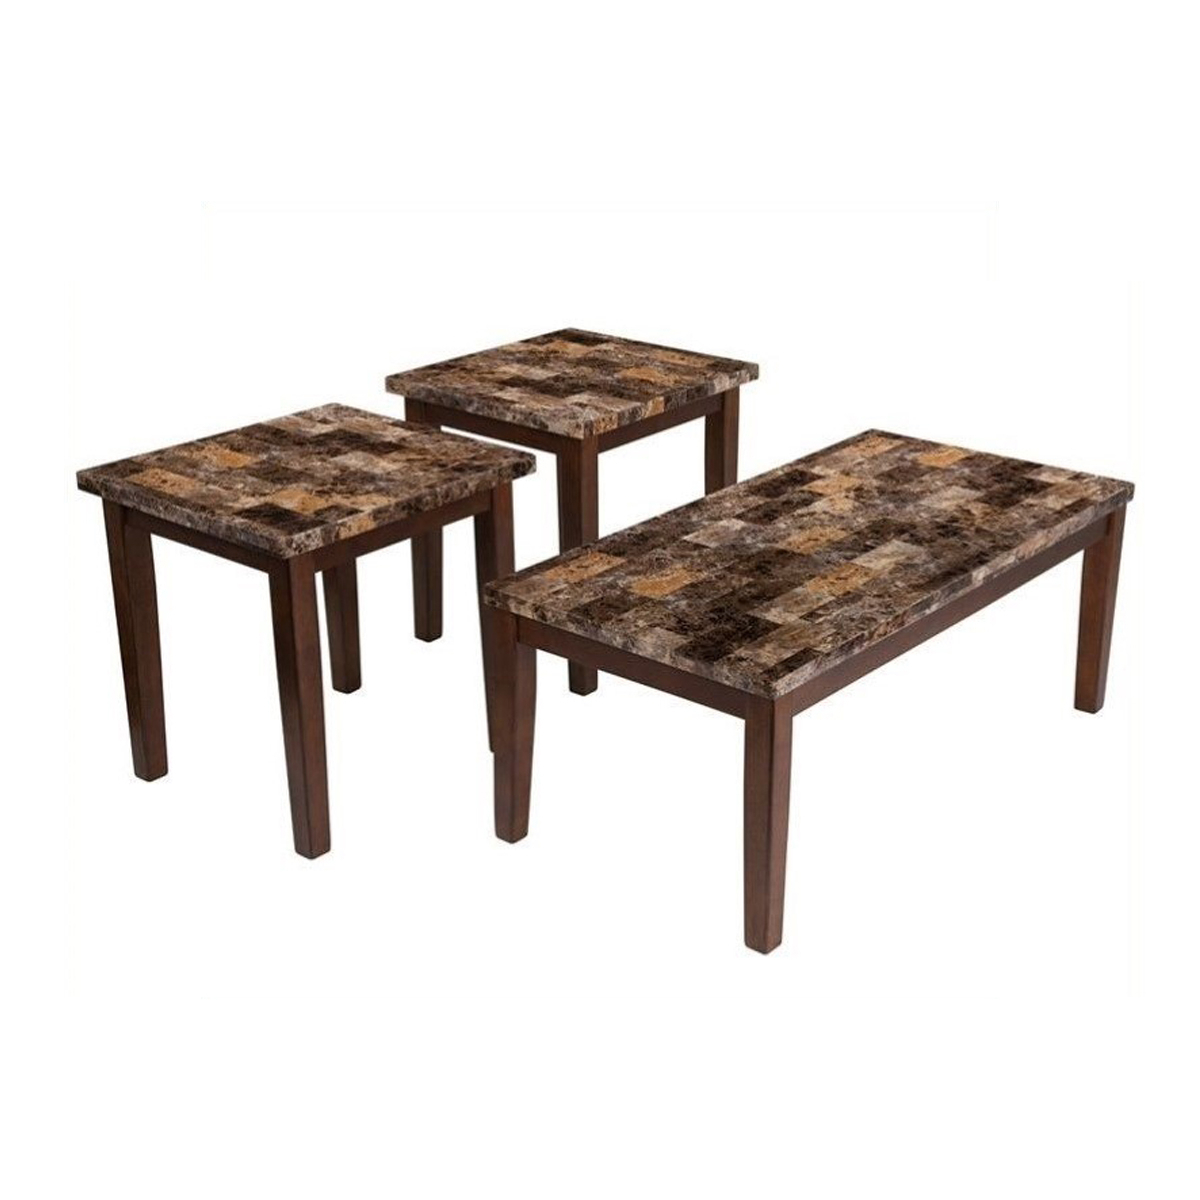 Rustic Style Faux Marble Top Table Set With Tapered Wooden Legs, Set Of Three, Brown- Saltoro Sherpi